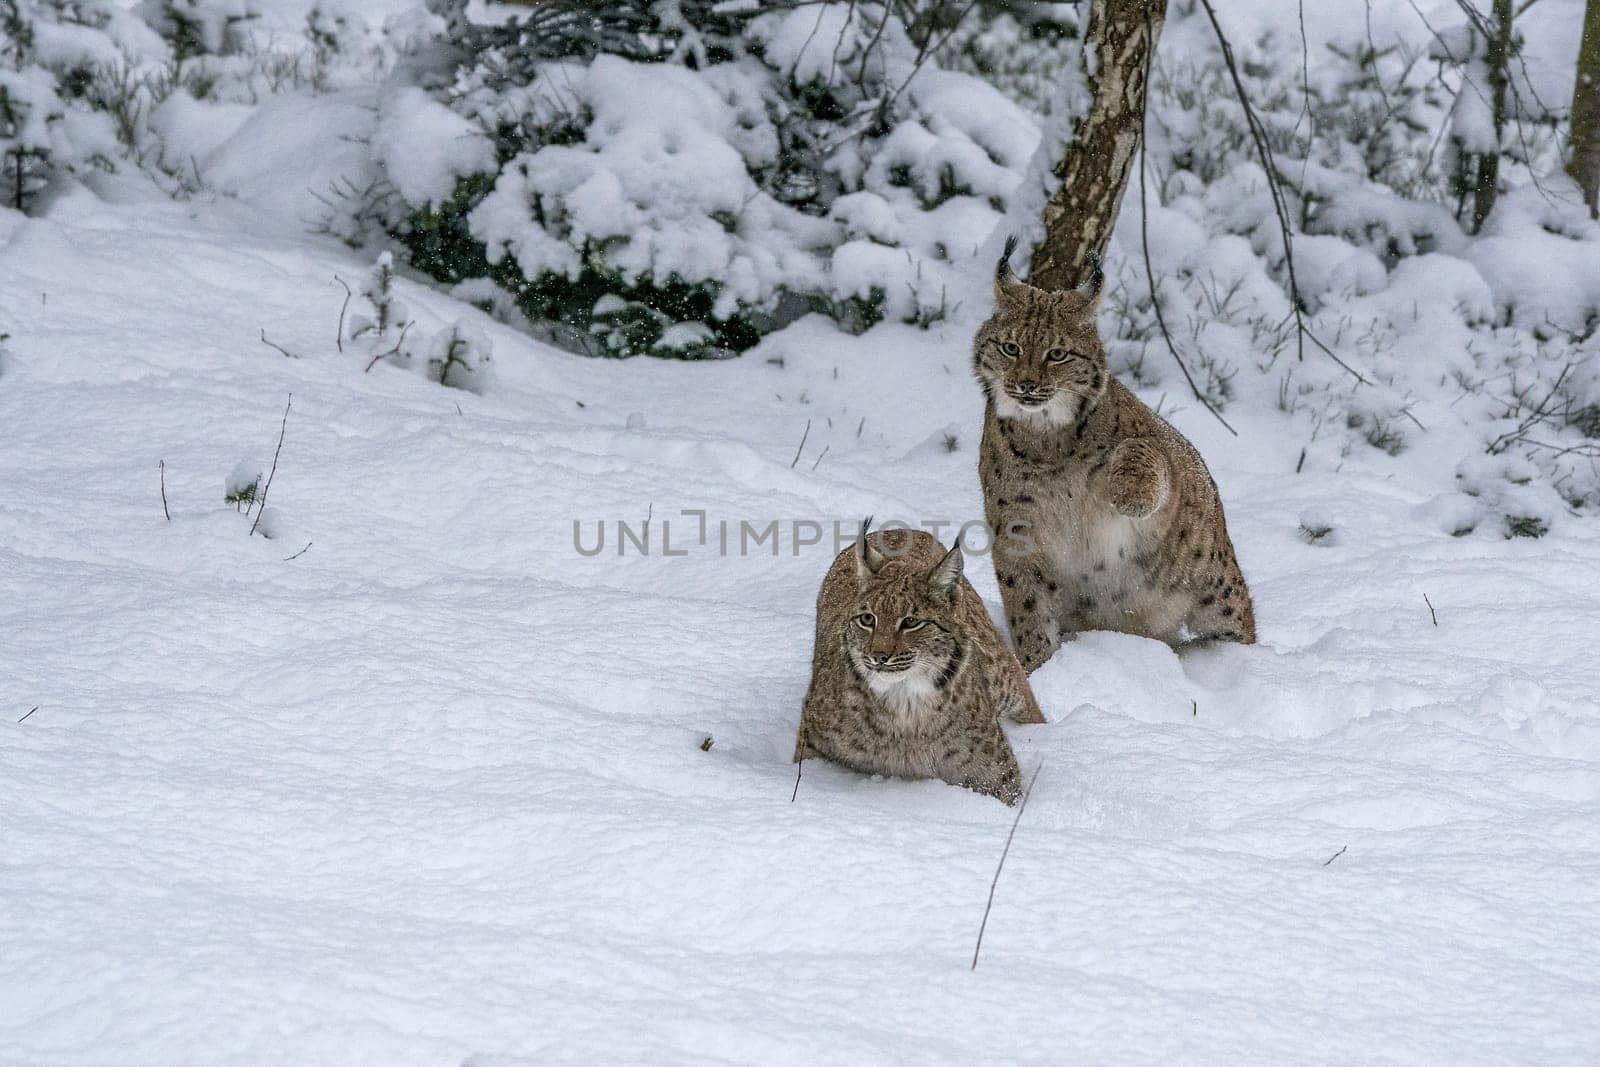 hunting Eurasian Lynx walking, wild cat in the forest with snow. Wildlife scene from winter nature. Cute big cat in habitat, cold condition.